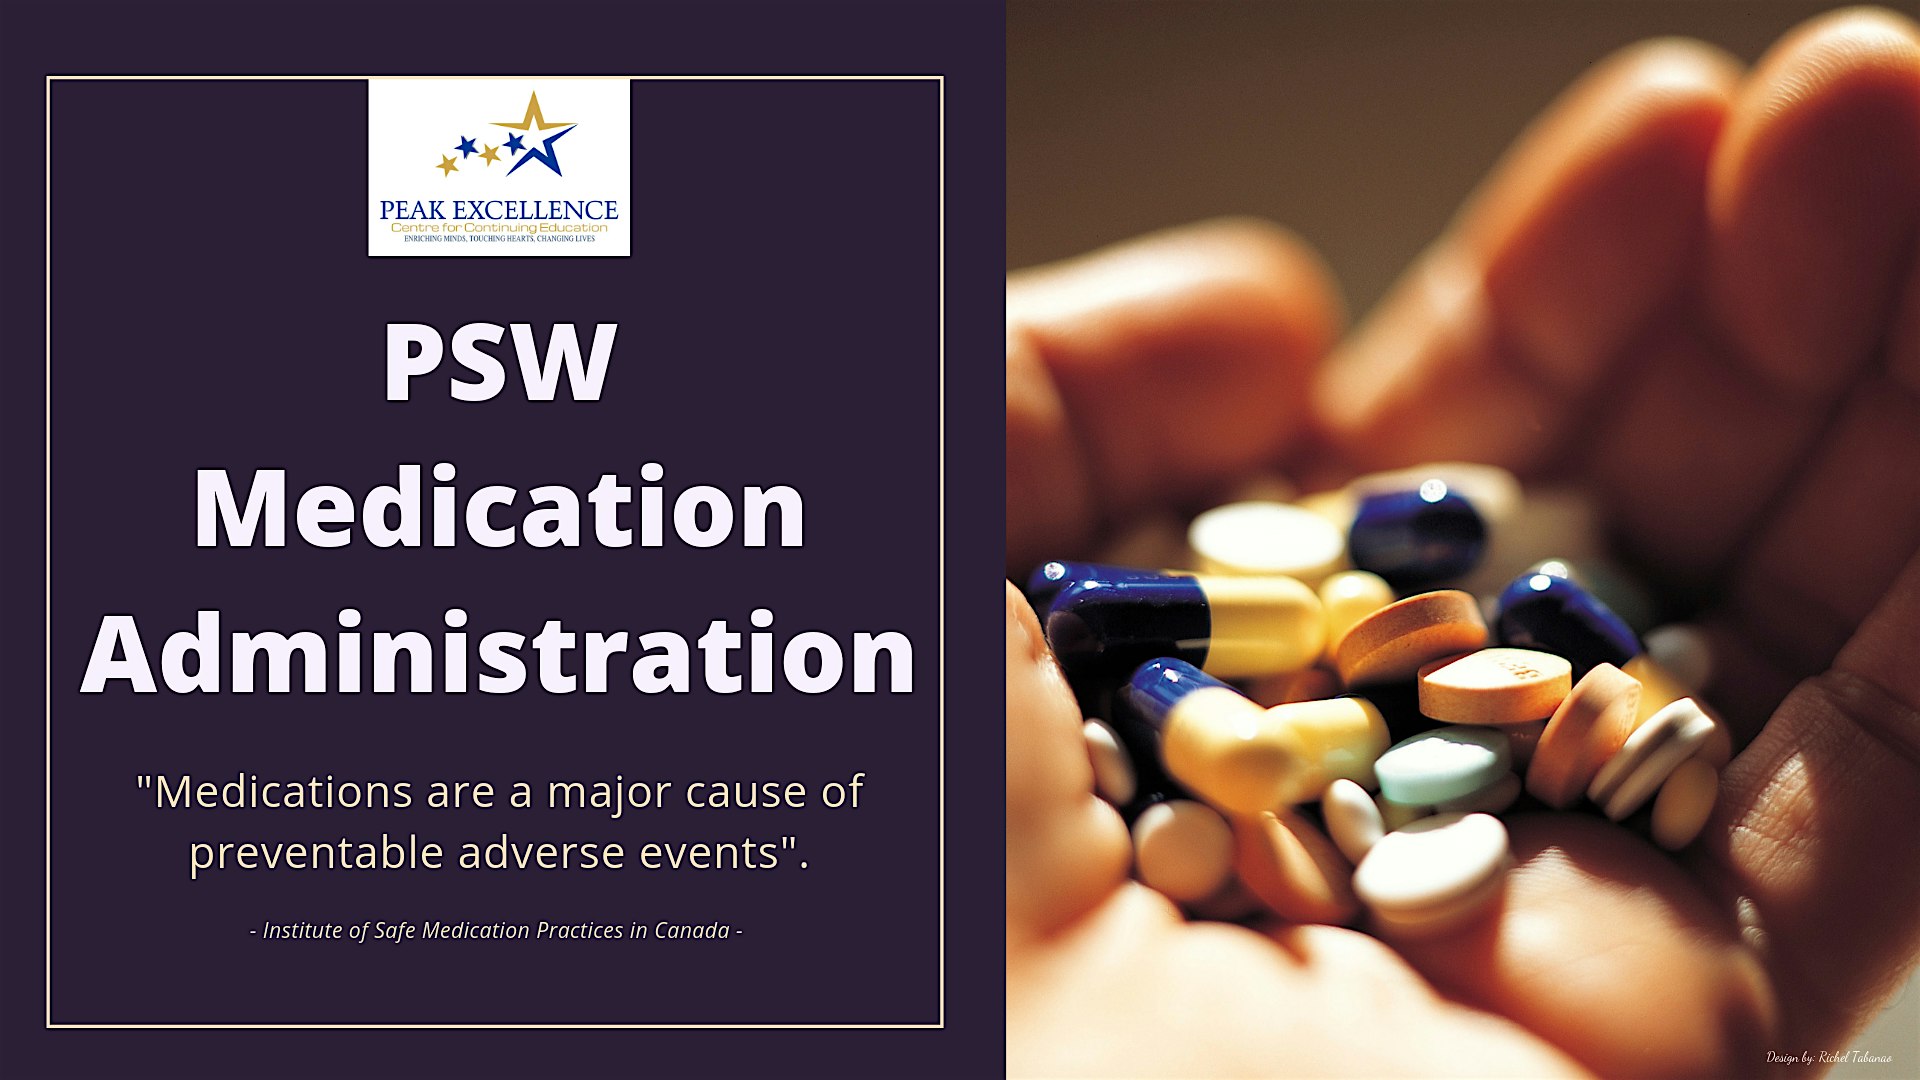 Medication Administration for Unregulated Healthcare Providers